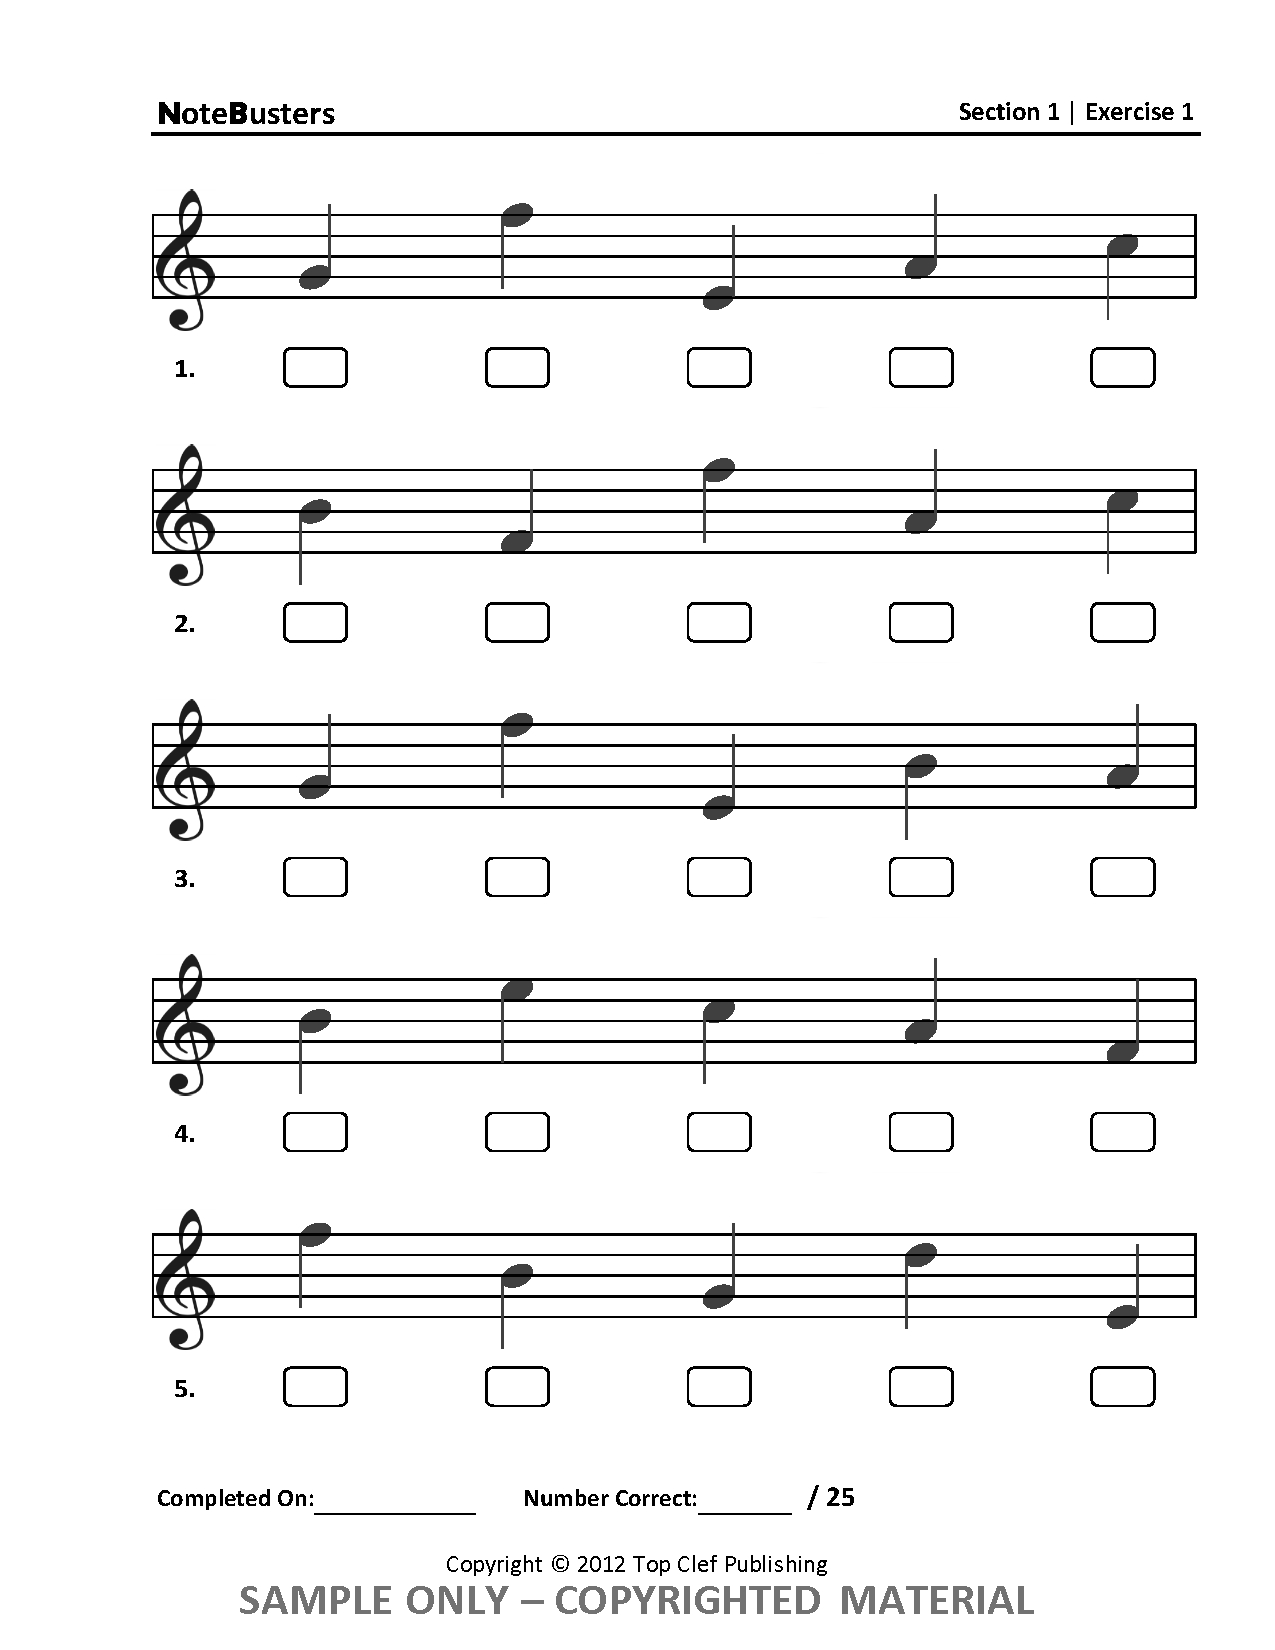 Sample Exercises - Notebusters Note Reading Music Workbook | Reading Music Worksheets Printable